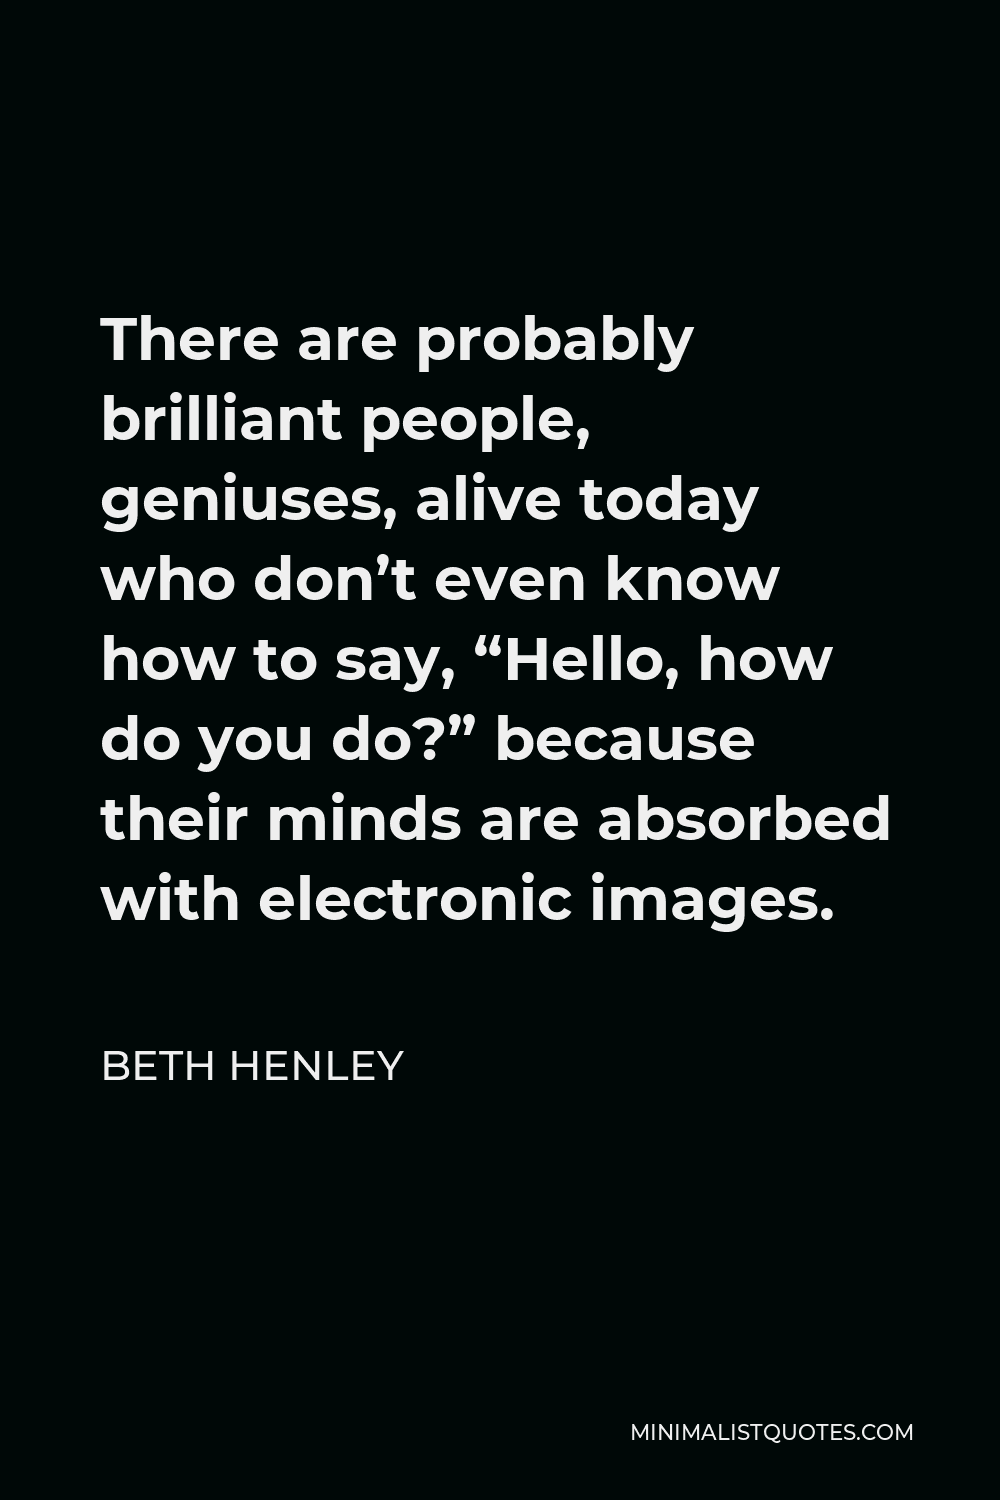 Beth Henley Quote - There are probably brilliant people, geniuses, alive today who don’t even know how to say, “Hello, how do you do?” because their minds are absorbed with electronic images.